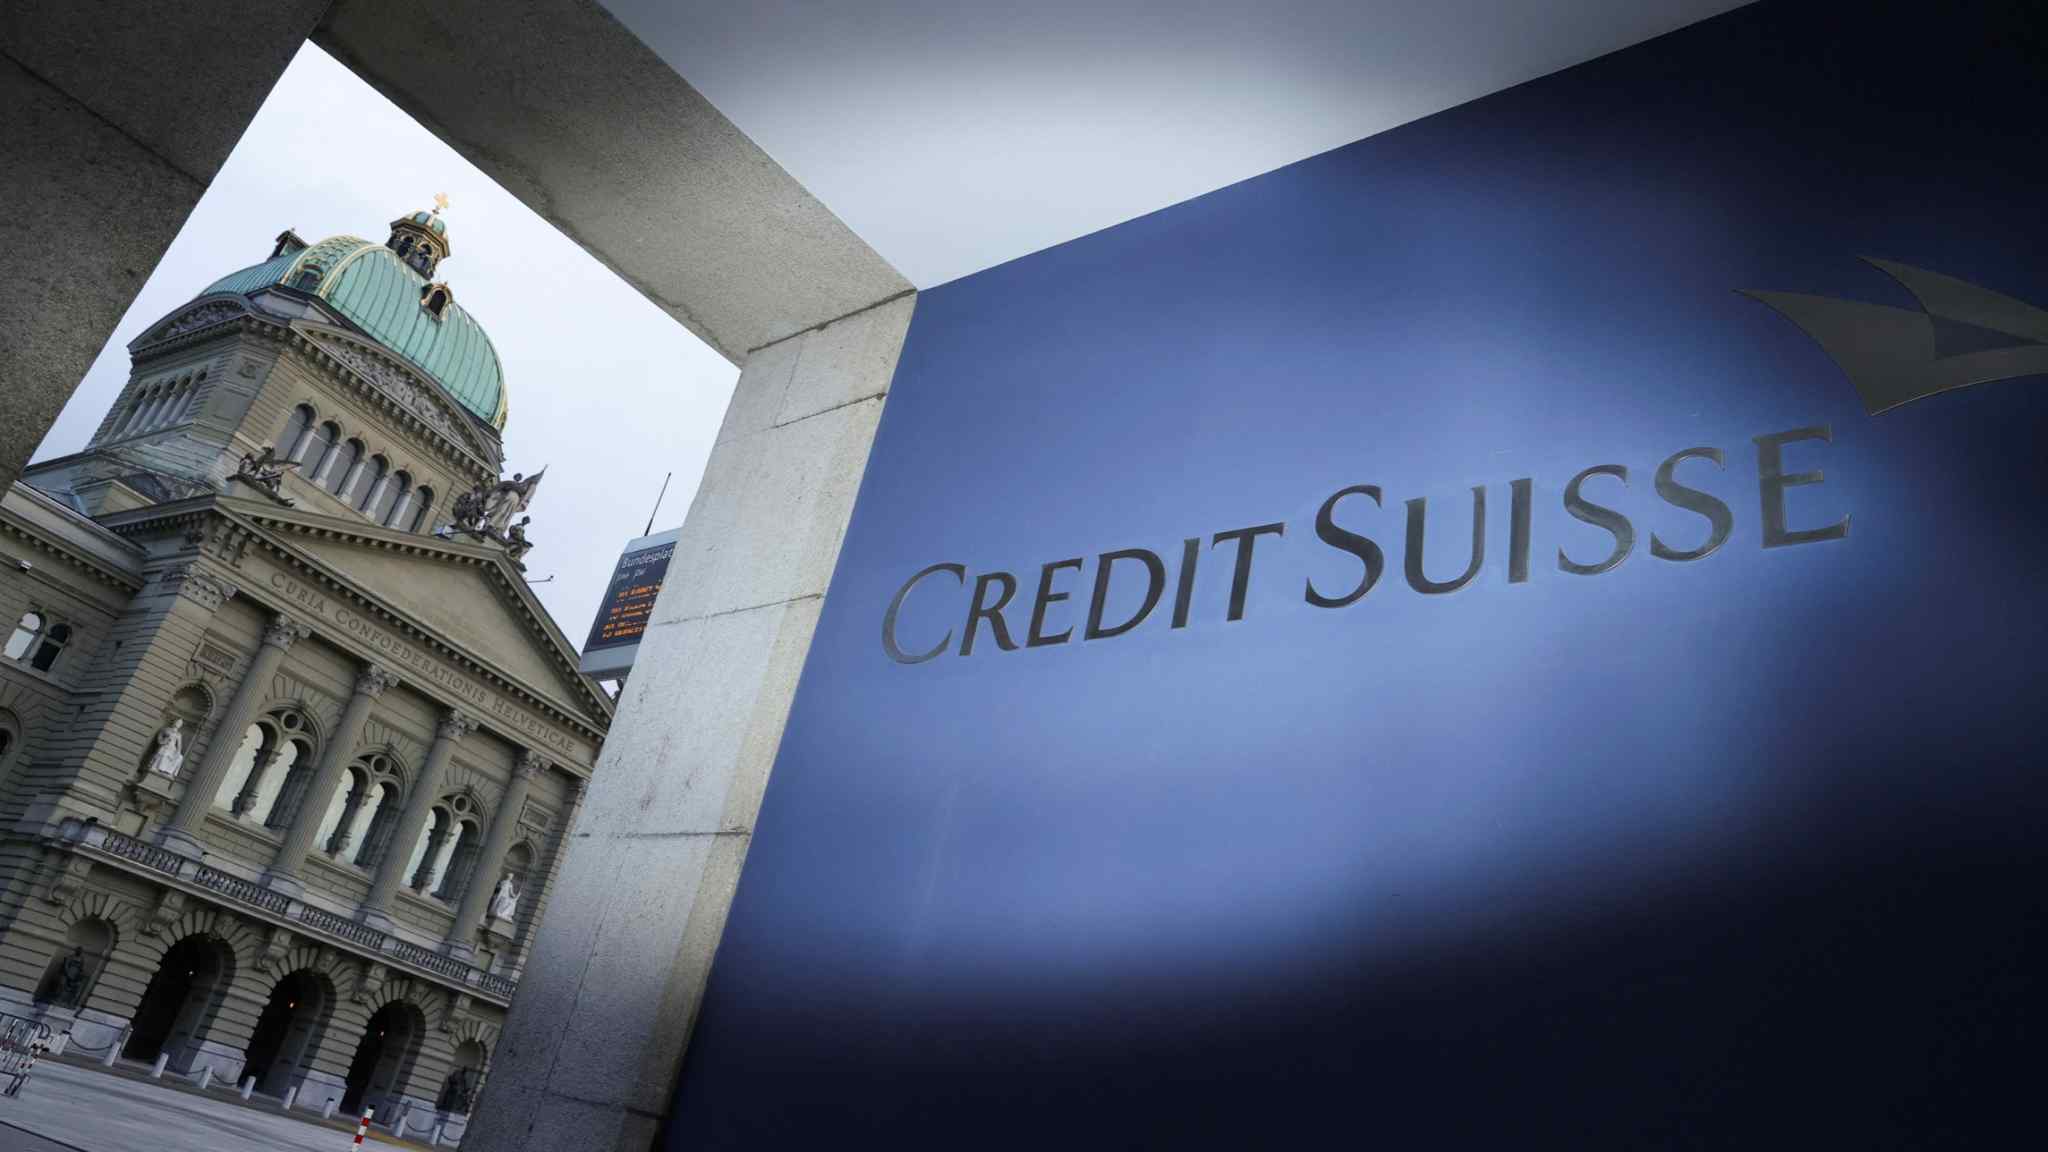 Fall of Credit Suisse shows more work is needed on bank risk